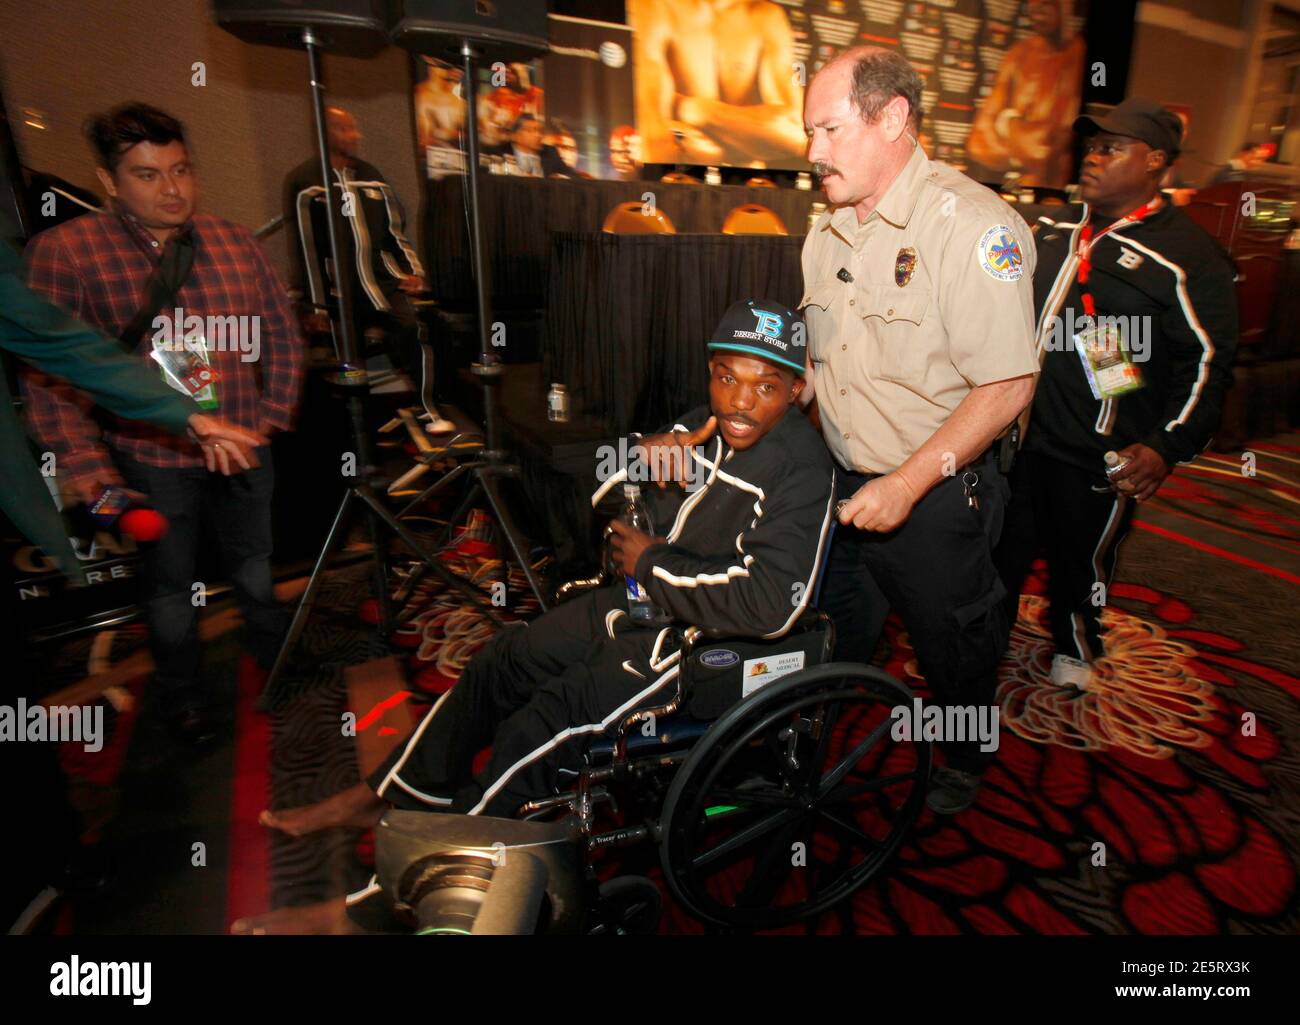 Timothy Jr. of the U.S. leaves a news conference in a wheelchair after injuring left during the WBO welterweight champion fight against Manny Pacquiao of the Philippines at the